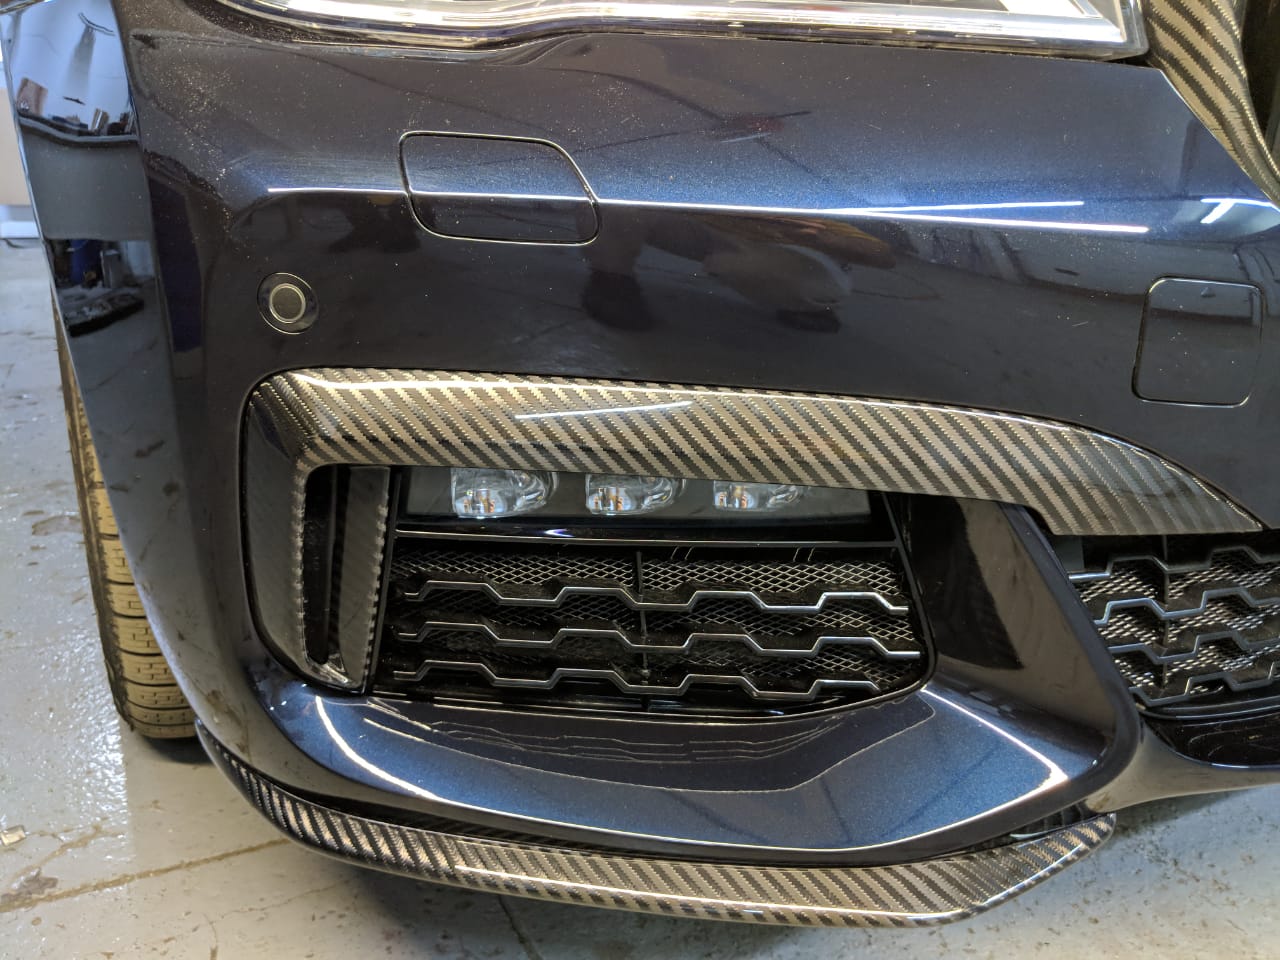 Fangs of the front bumper Carbon for BMW 7 series G11/G12